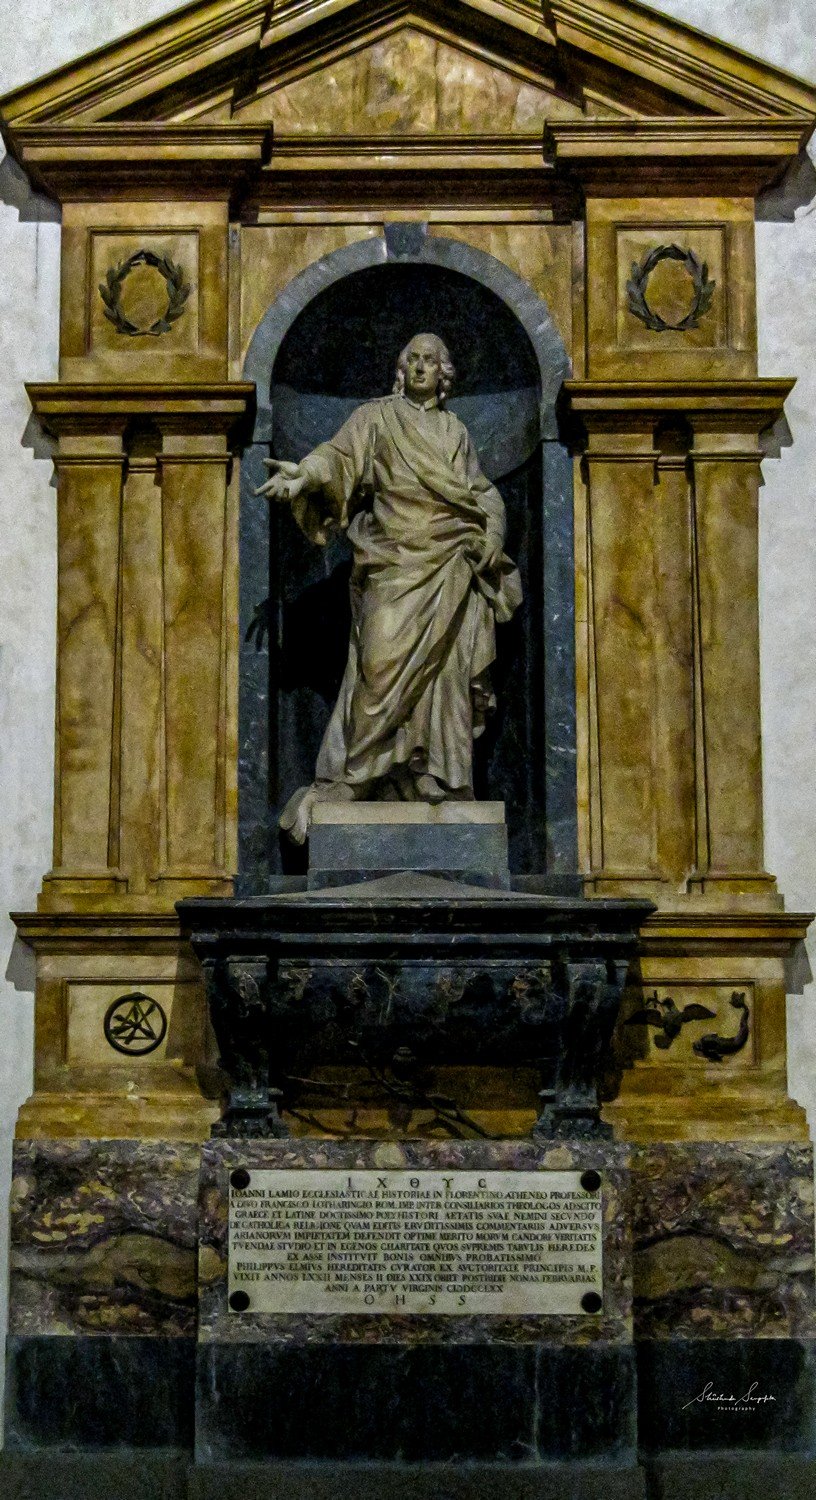 Funerary Monument Guglielmo Marconi at basilica di santa croce church in florence tuscany italy shot in summer